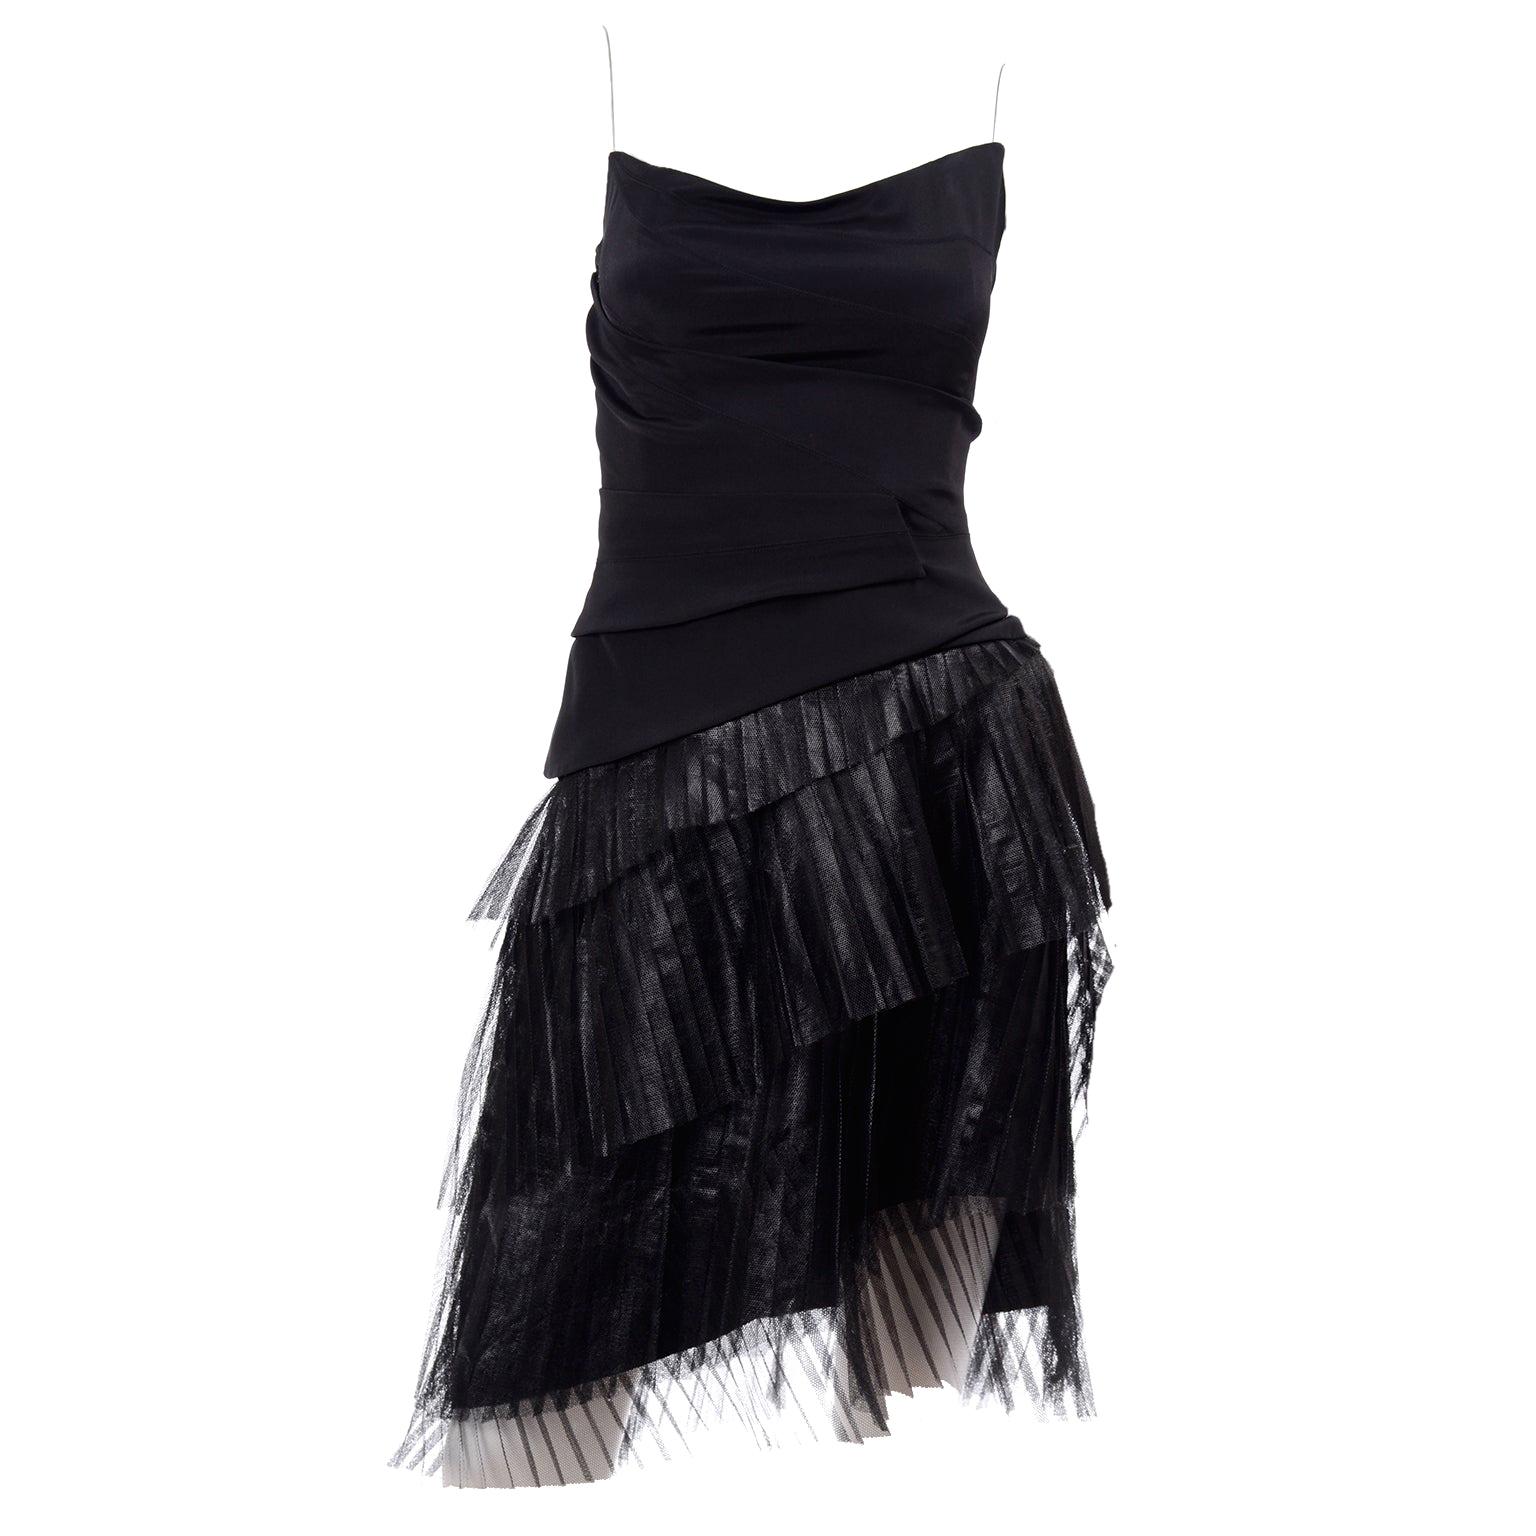 Danes Vintage Black Evening Dress With Asymmetrical Pleated Metallic Tulle Skirt For Sale